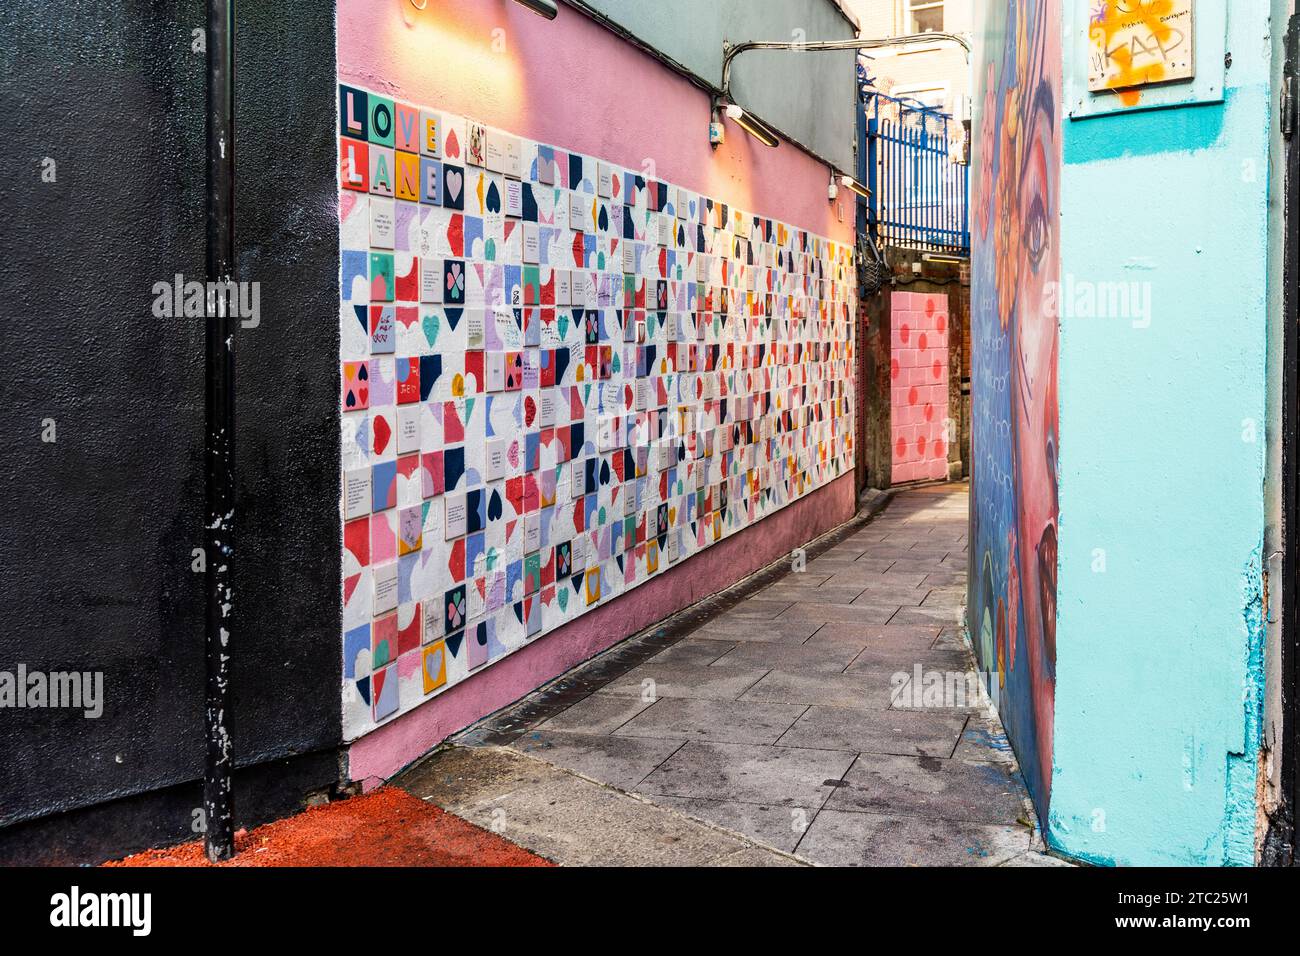 Love Lane, an alley with murals and ceramic tiles with quotes about love, in Crampton Court, Temple Bar district, Dublin city center, Ireland Stock Photo